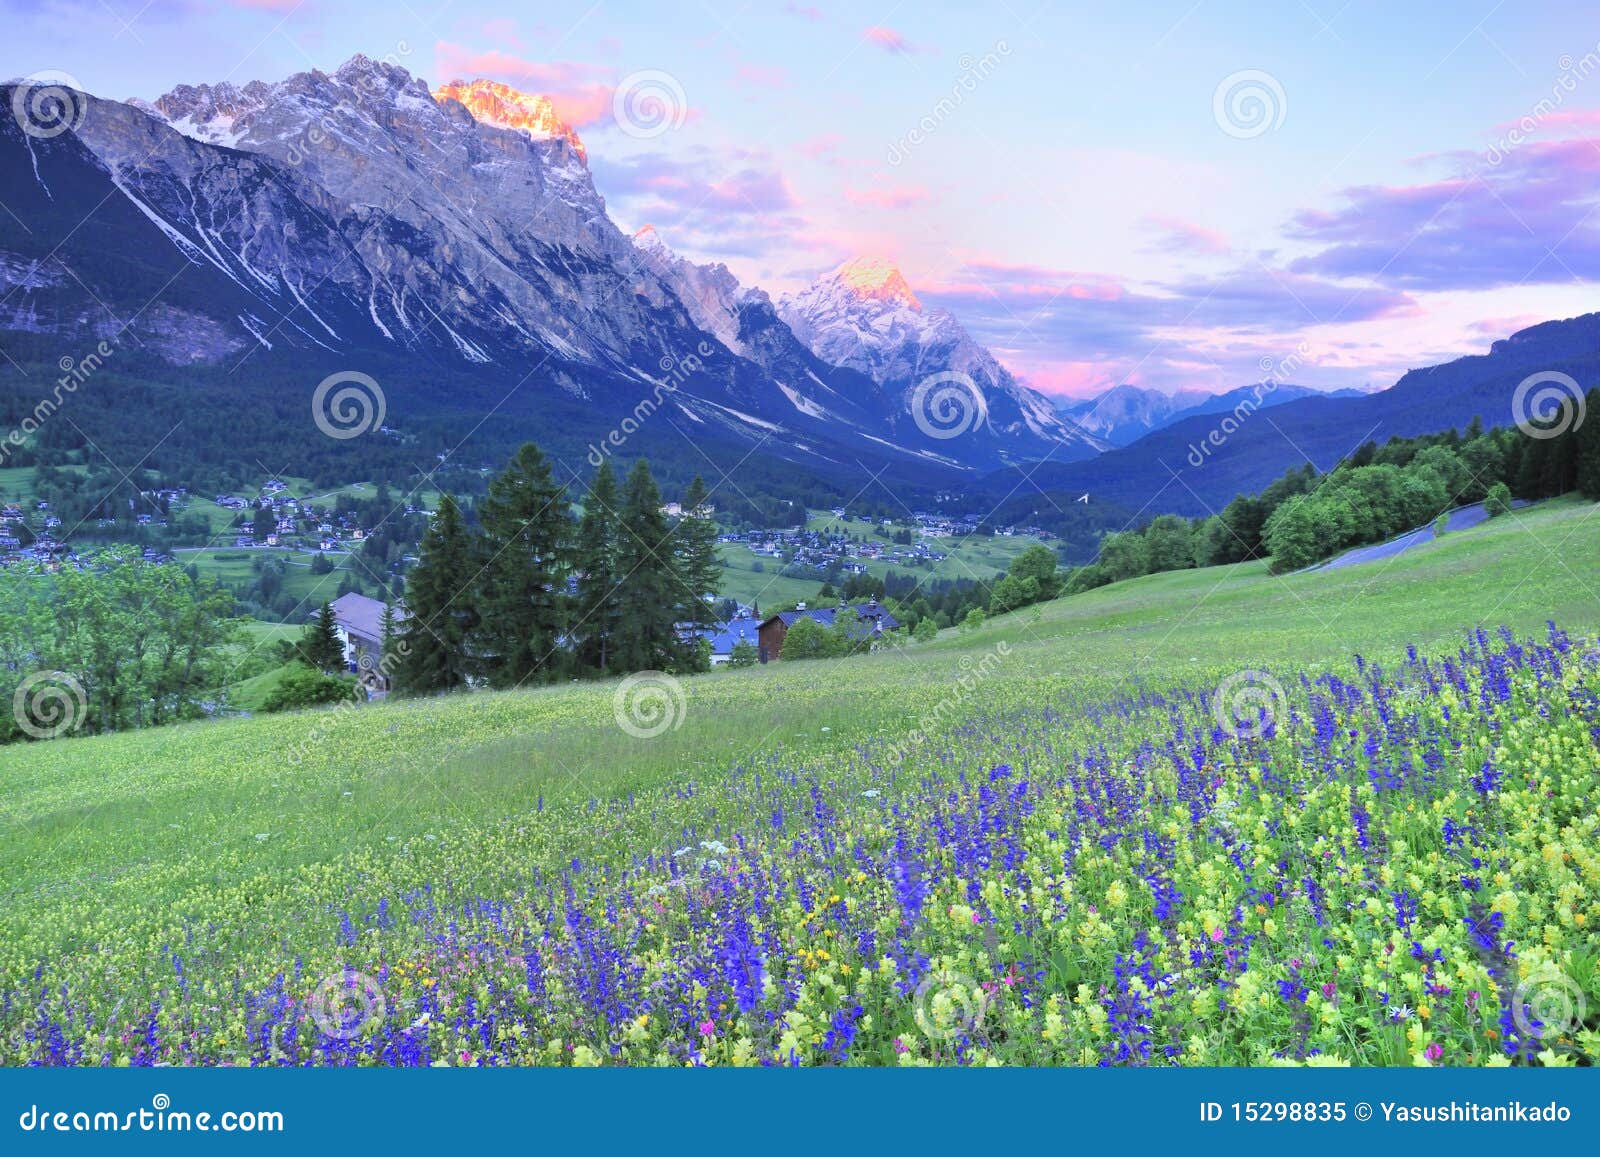 flower field and sunset at dolomite